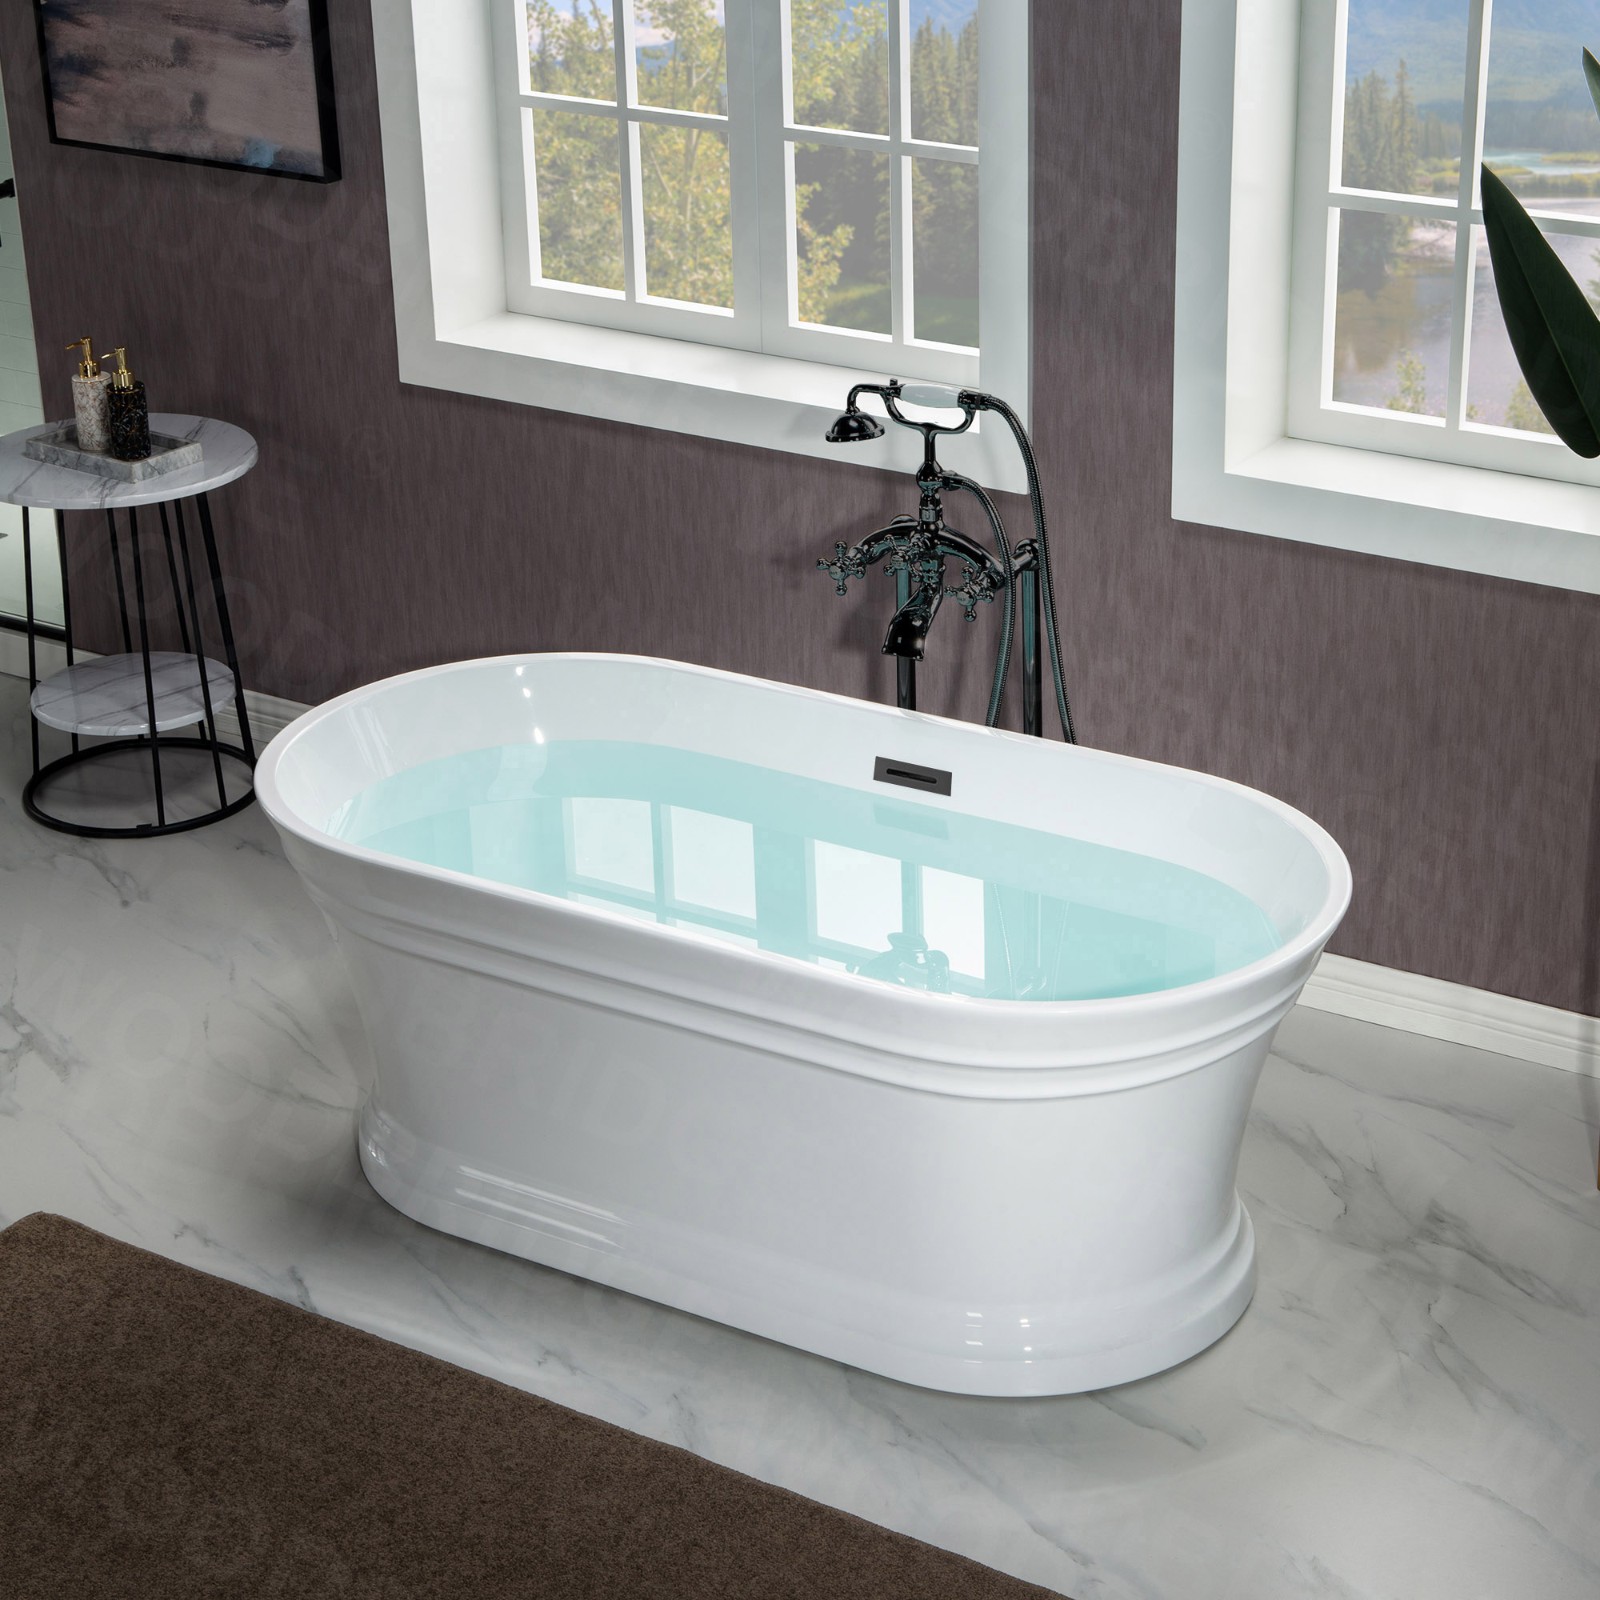  WOODBRIDGE 67 in. Freestanding Double Ended Acrylic Soaking Bathtub with Center Drain Assembly and Overflow, BTA1537/B1537, Glossy White_7718